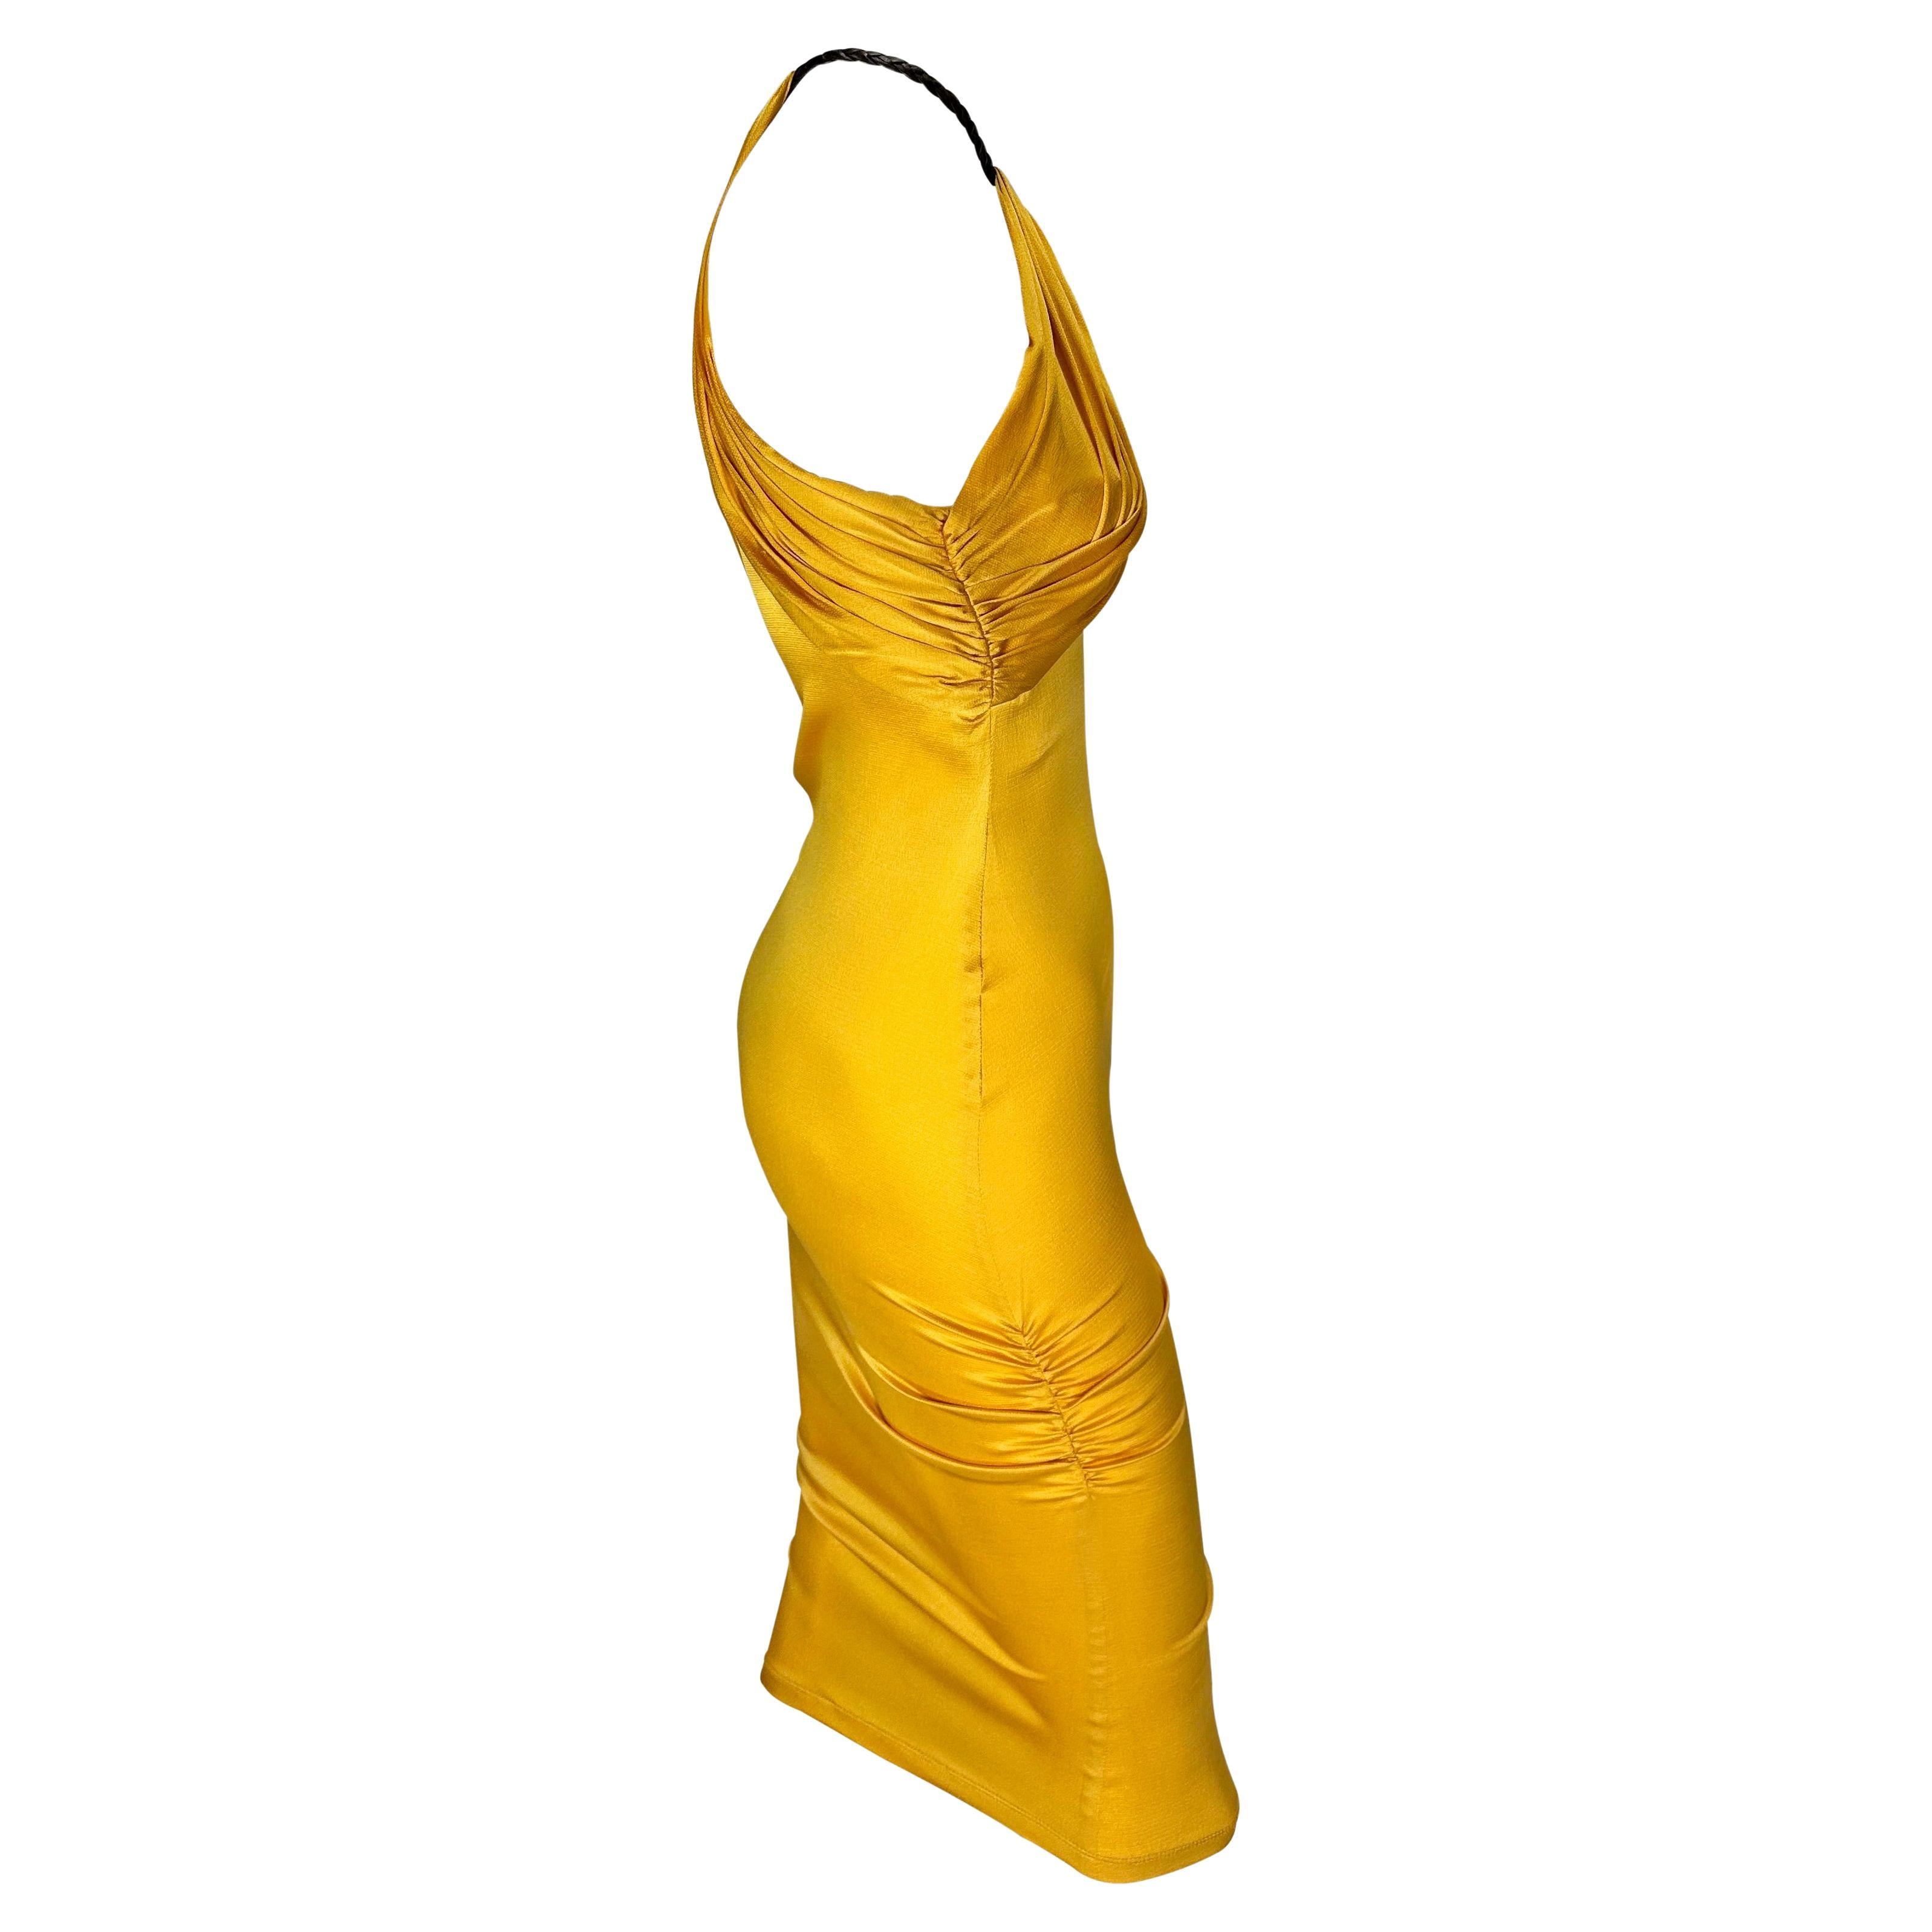 S/S 2005 Gucci Beyoncé Marigold Yellow Ruched Satin Braided Leather Halter Dress For Sale 1